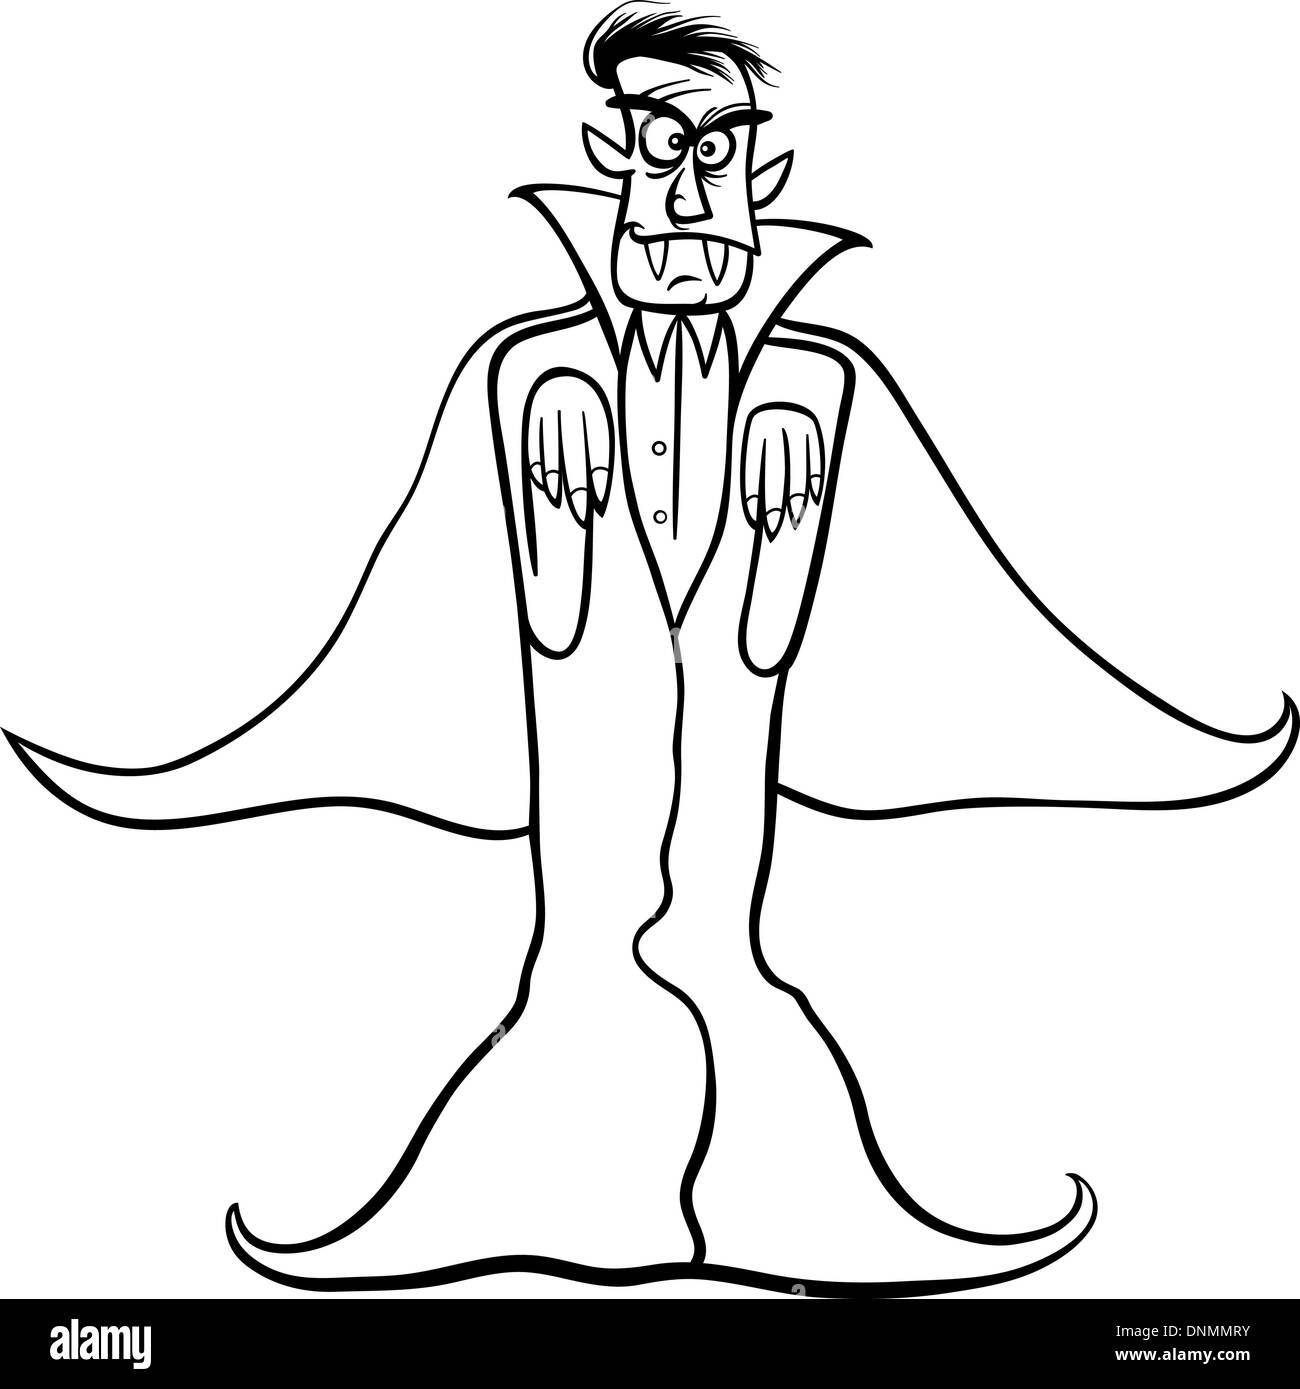 Black and White Cartoon Illustration of Scary Count Dracula Vampire for Coloring Book Stock Vector